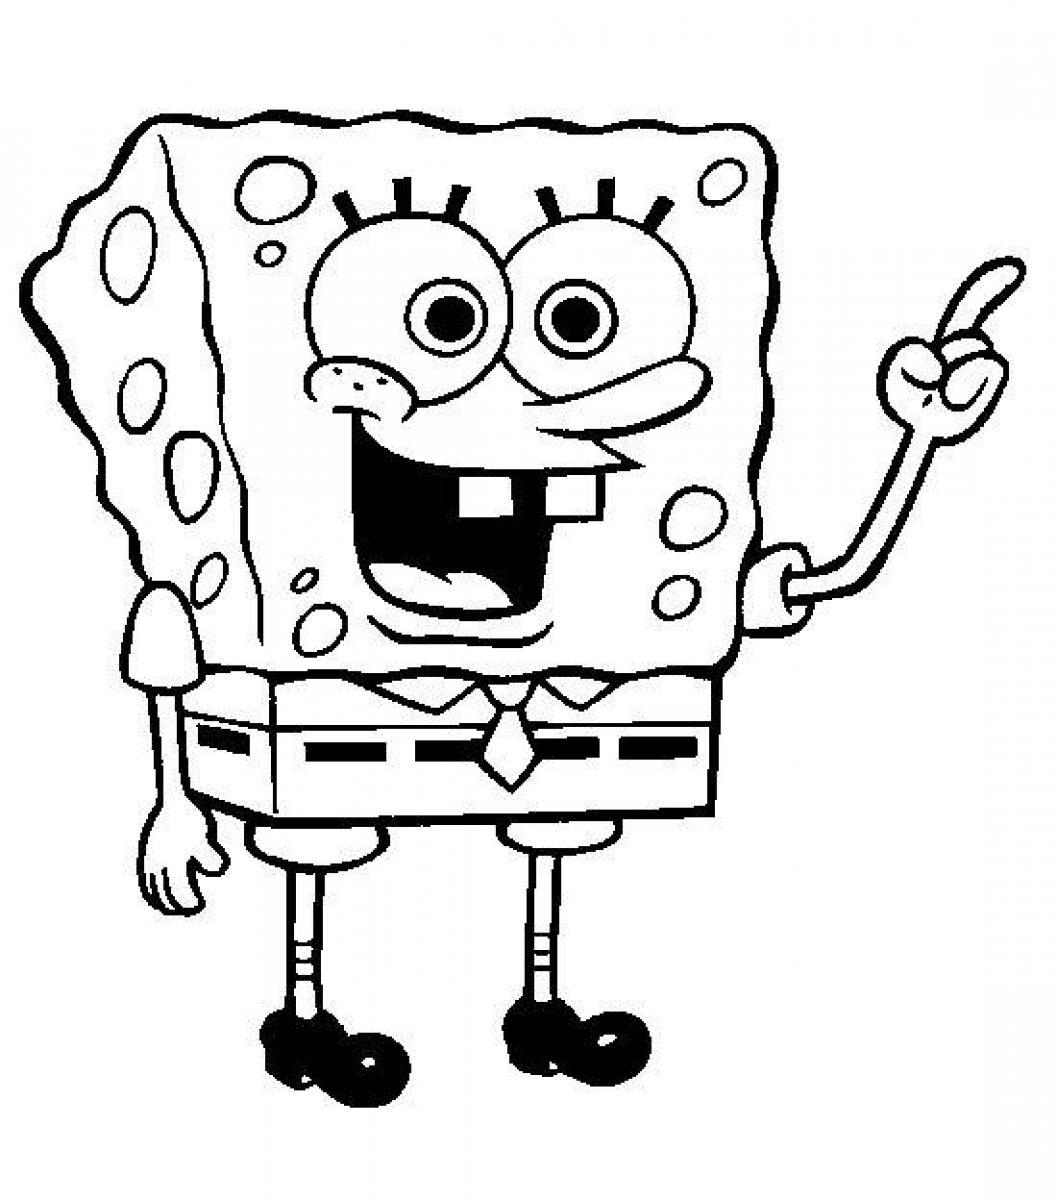 coloring pages of sopngebob - photo #2